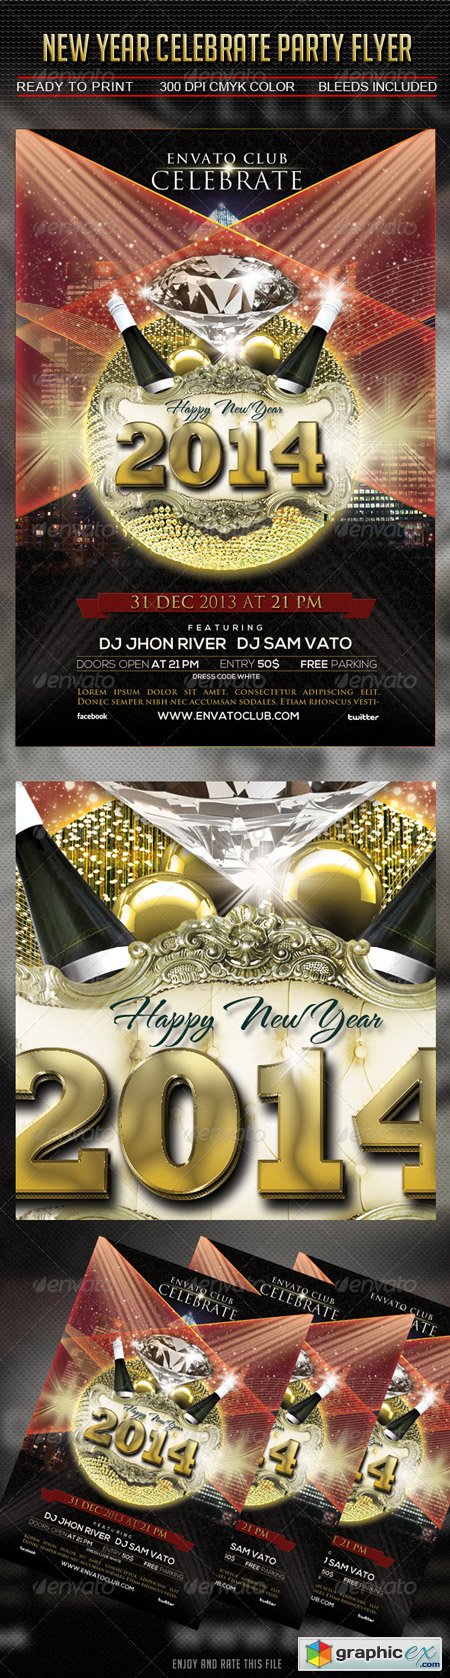 New Year Celebrate Party Flyer